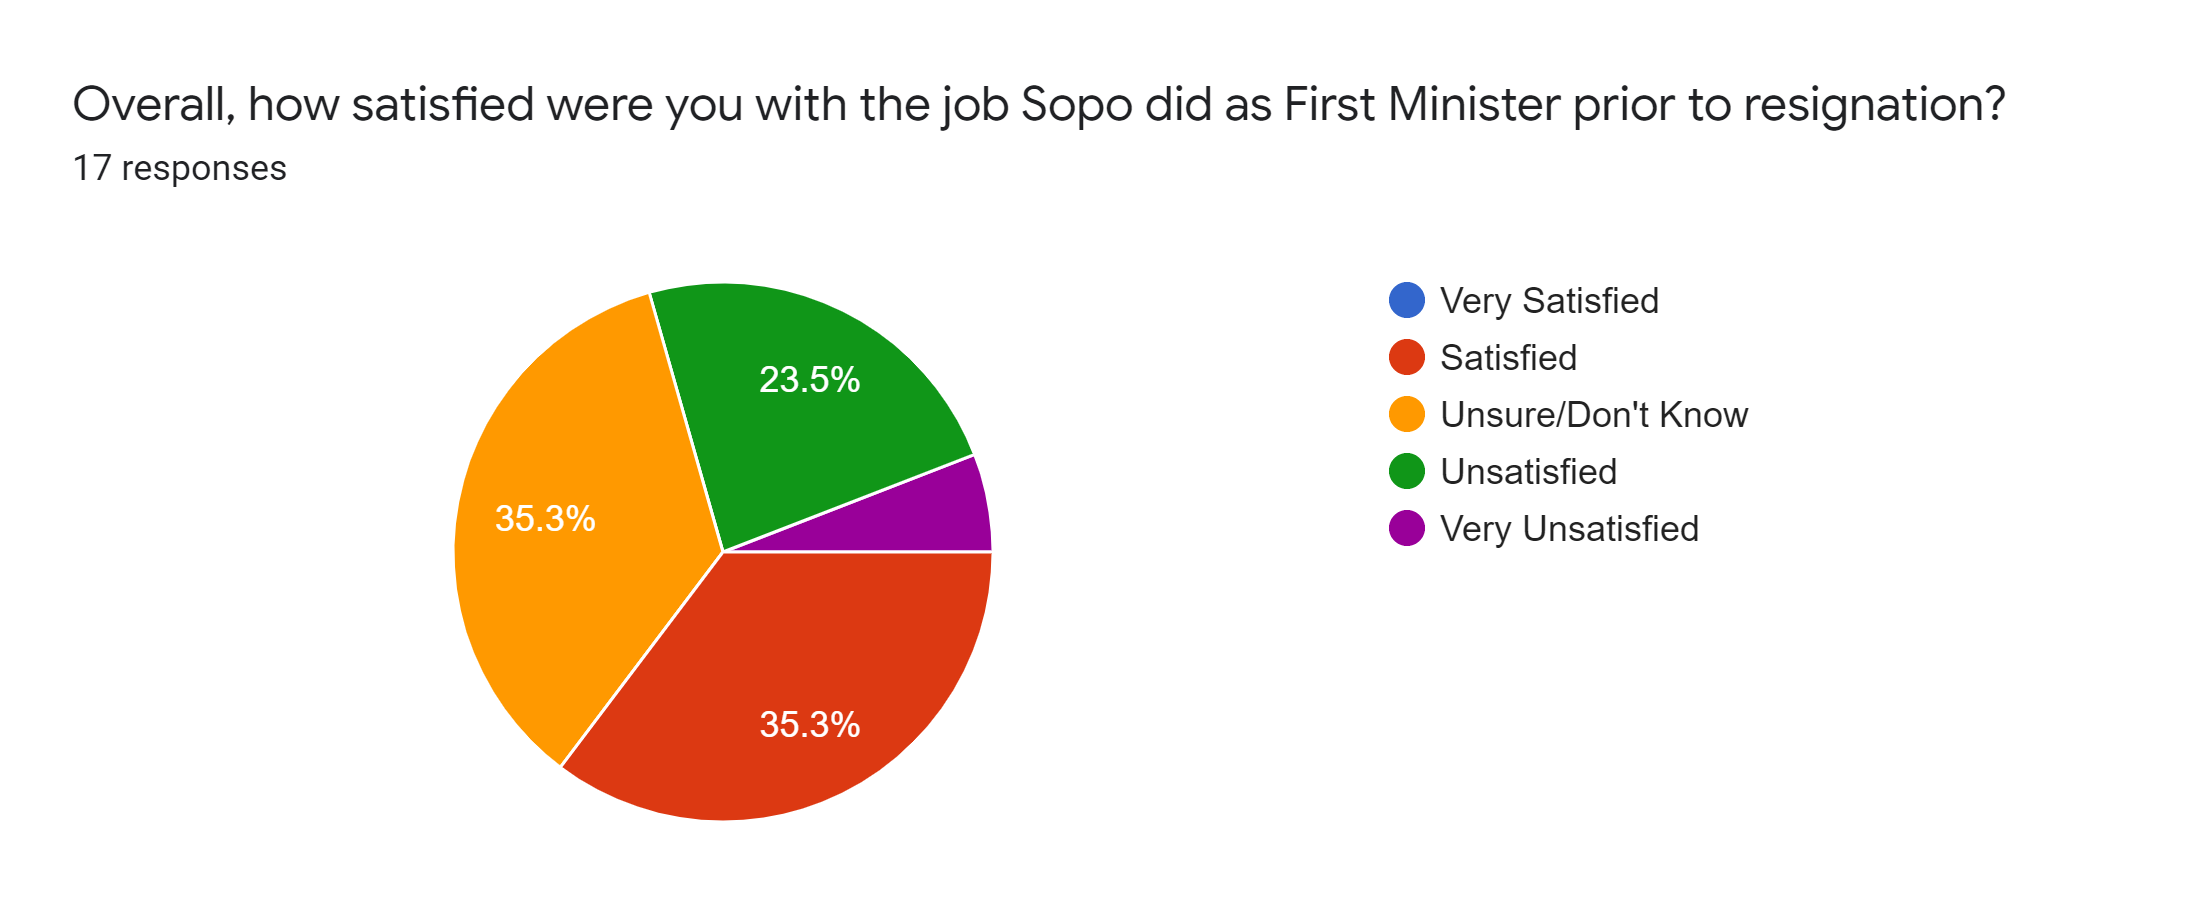 Forms response chart. Question title: Overall, how satisfied were you with the job Sopo did as First Minister prior to resignation?. Number of responses: 17 responses.